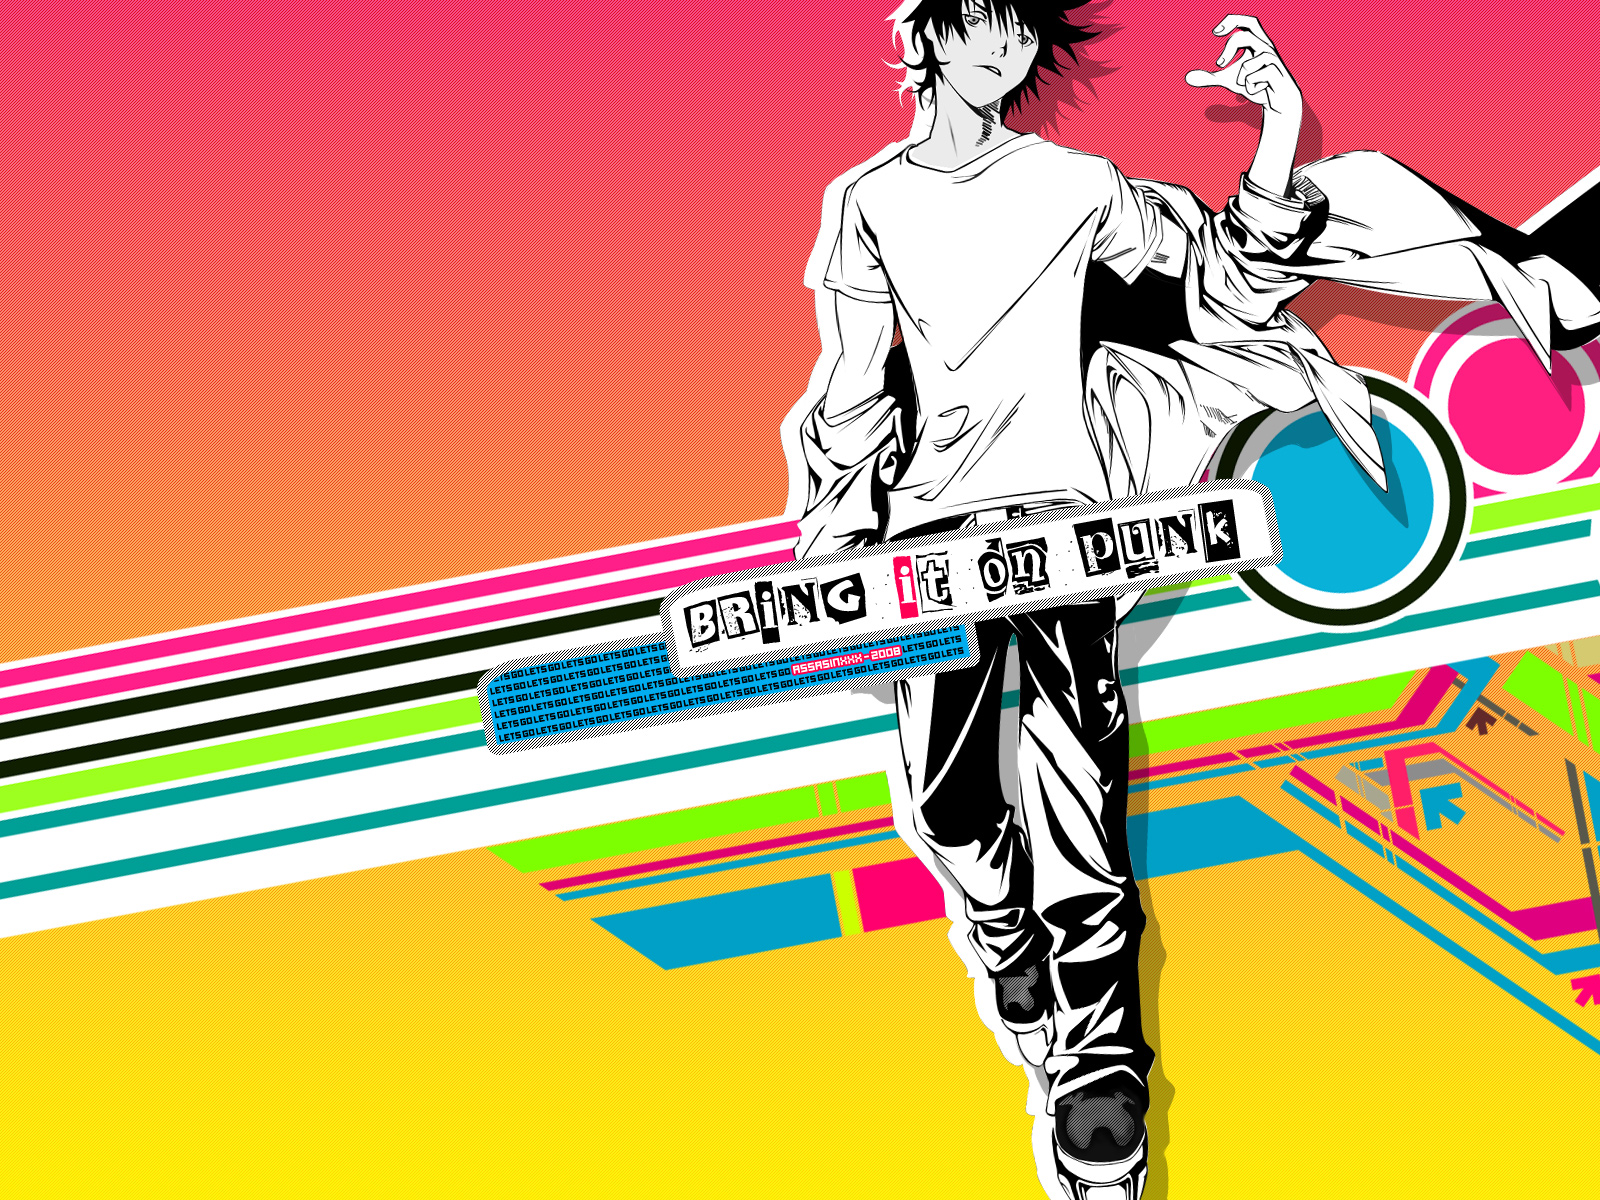 Colorful anime artwork featuring characters from Air Gear, creating an energetic and vibrant desktop wallpaper.